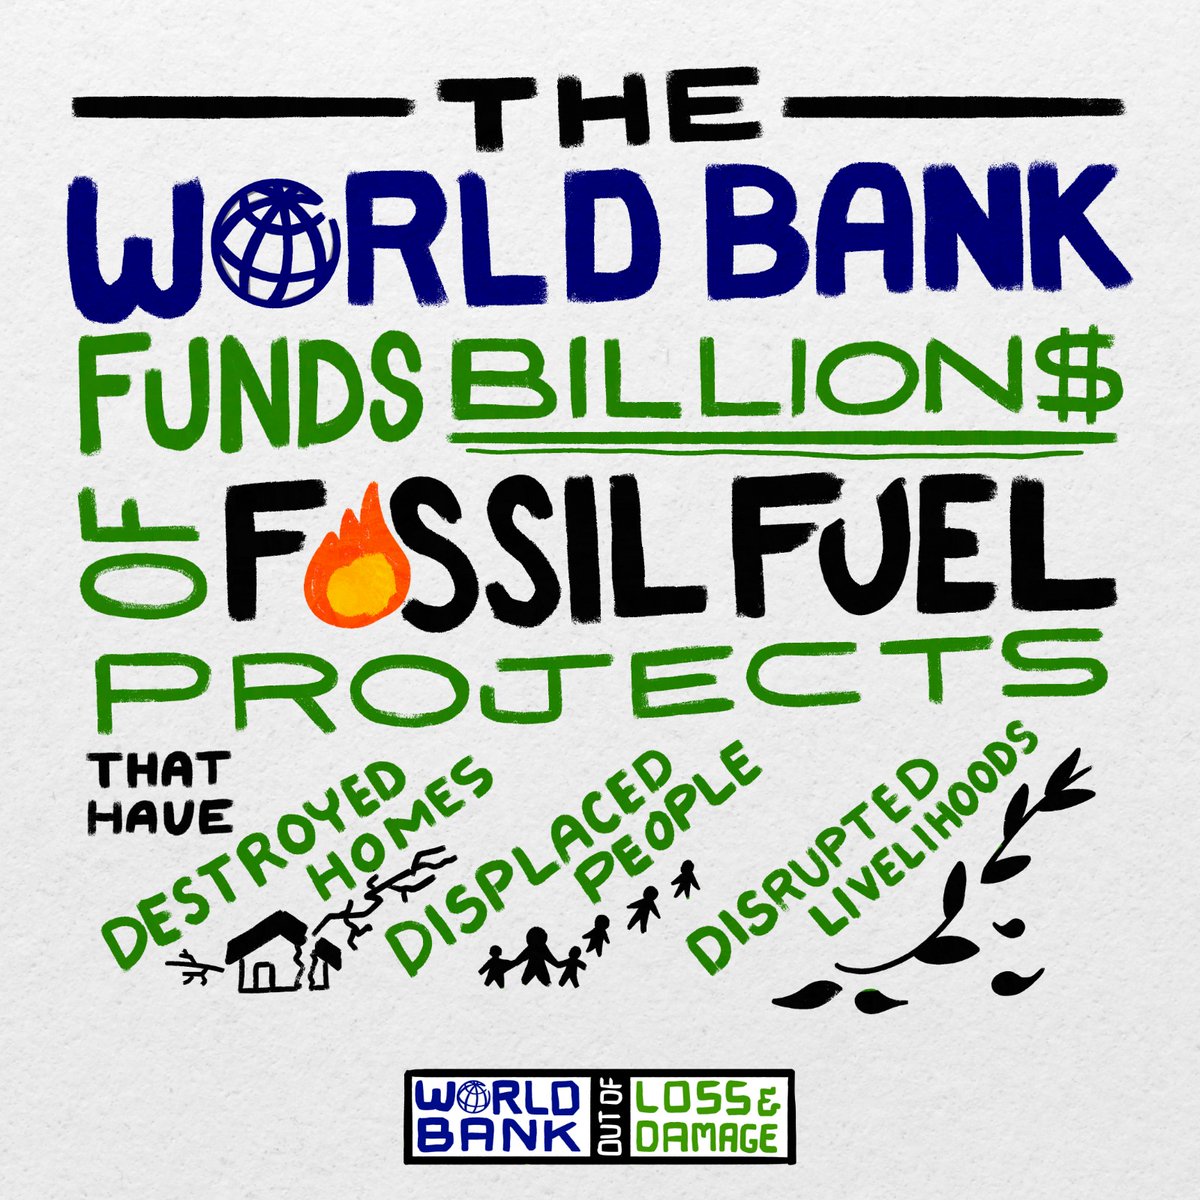 The US has proposed that the #LossAndDamageFund be under the @WorldBank.

But in 2022, WB put $3.7 BILLION into oil & gas trade finance alone. Since 2015, it has given $15 BILLION to fossil fuels.

A WB-led LDF will mean more money for polluters, not people.

#WBOutOfLDF!